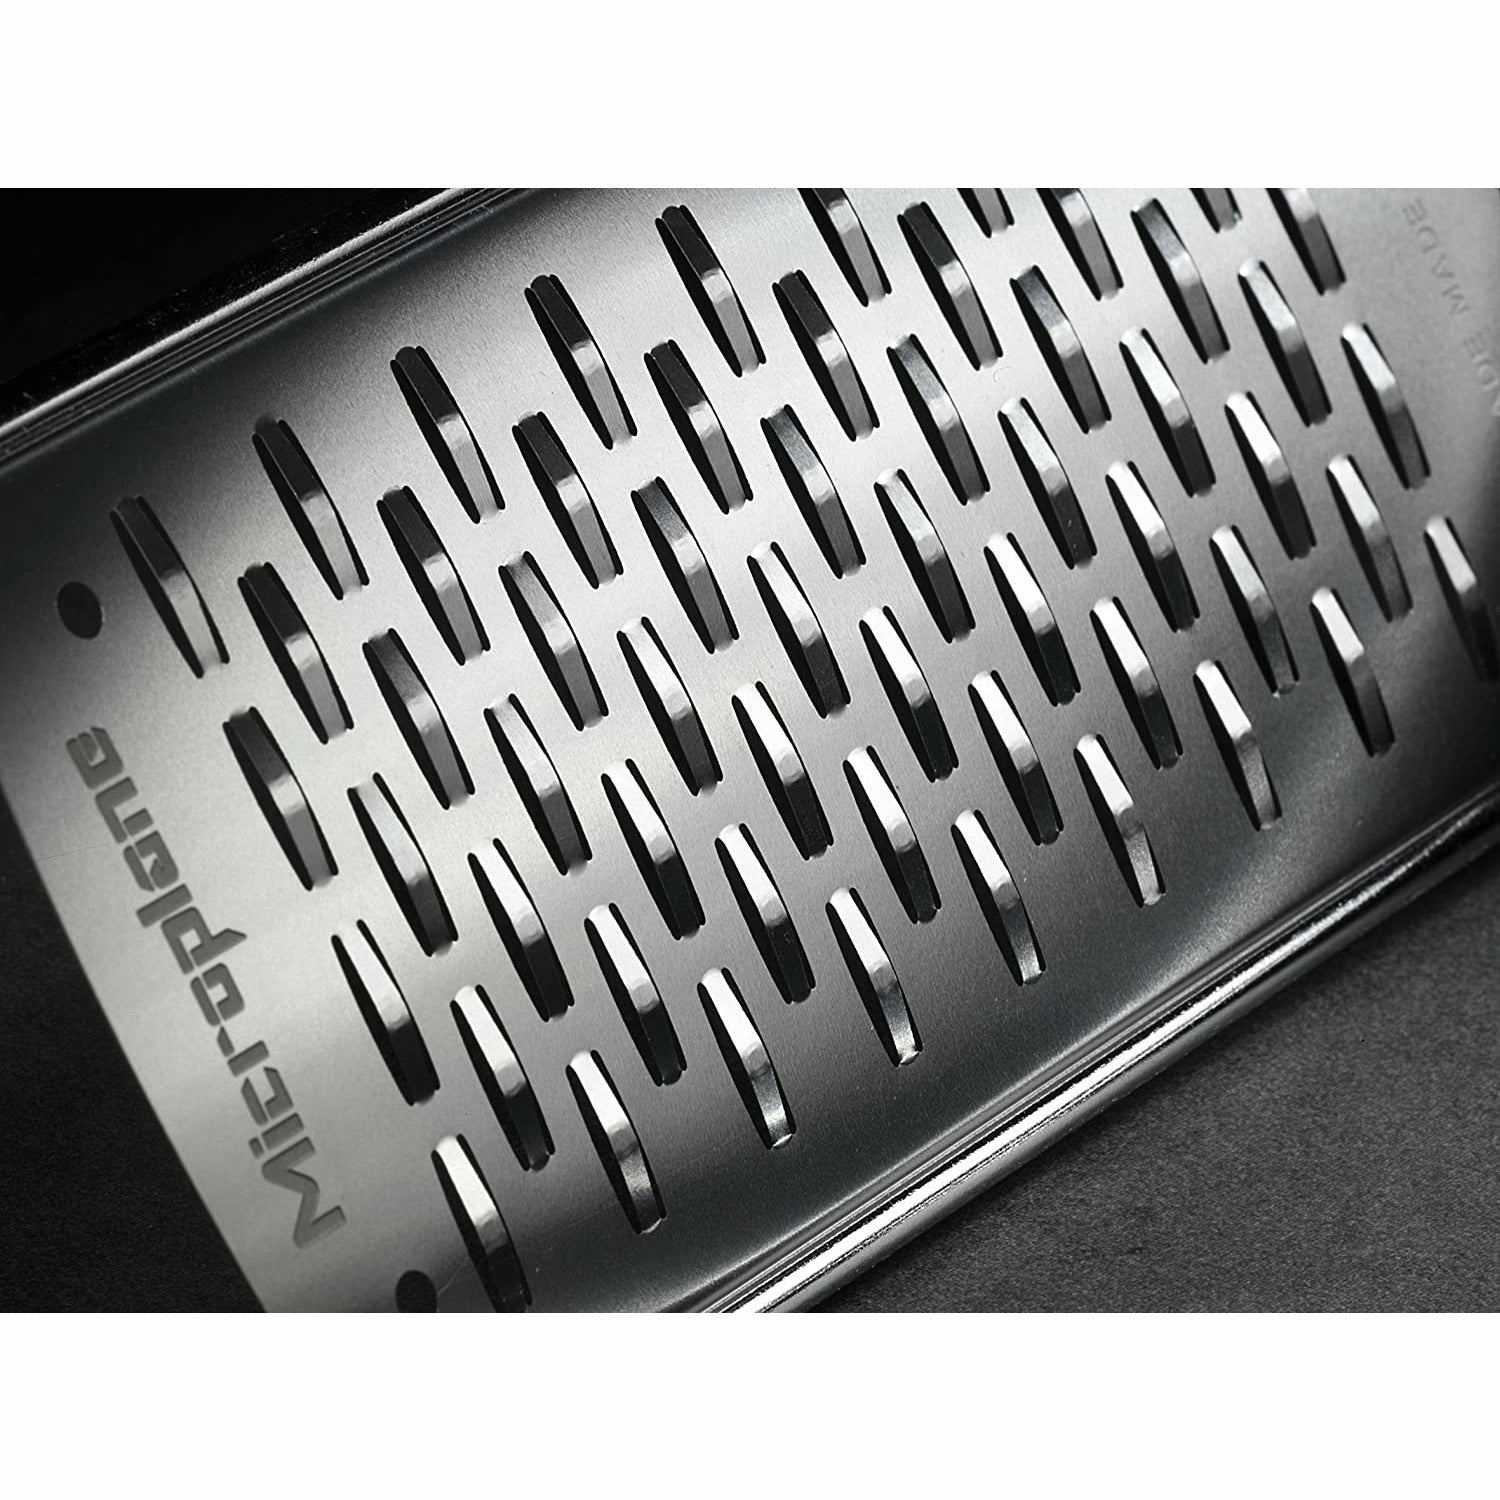 Fante Cousin Nico's Cheese Grater – The Seasoned Gourmet